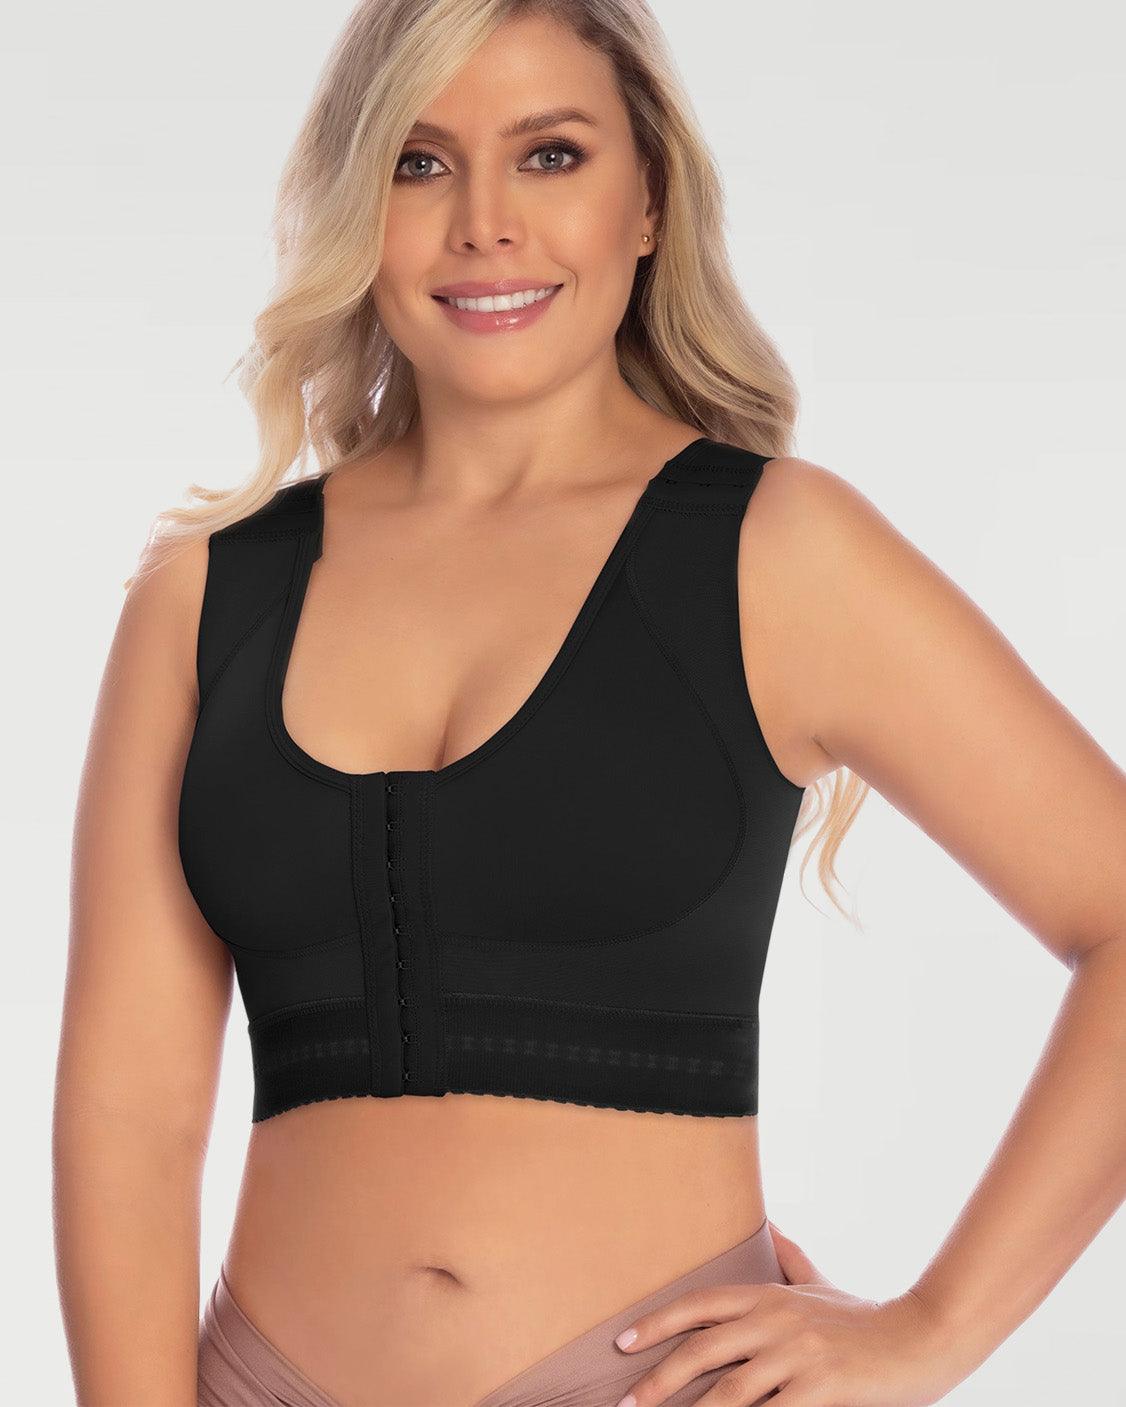 DELIE GIRDLES | FIT360 POST-SURGICAL BRA REF 9348 - Wishe